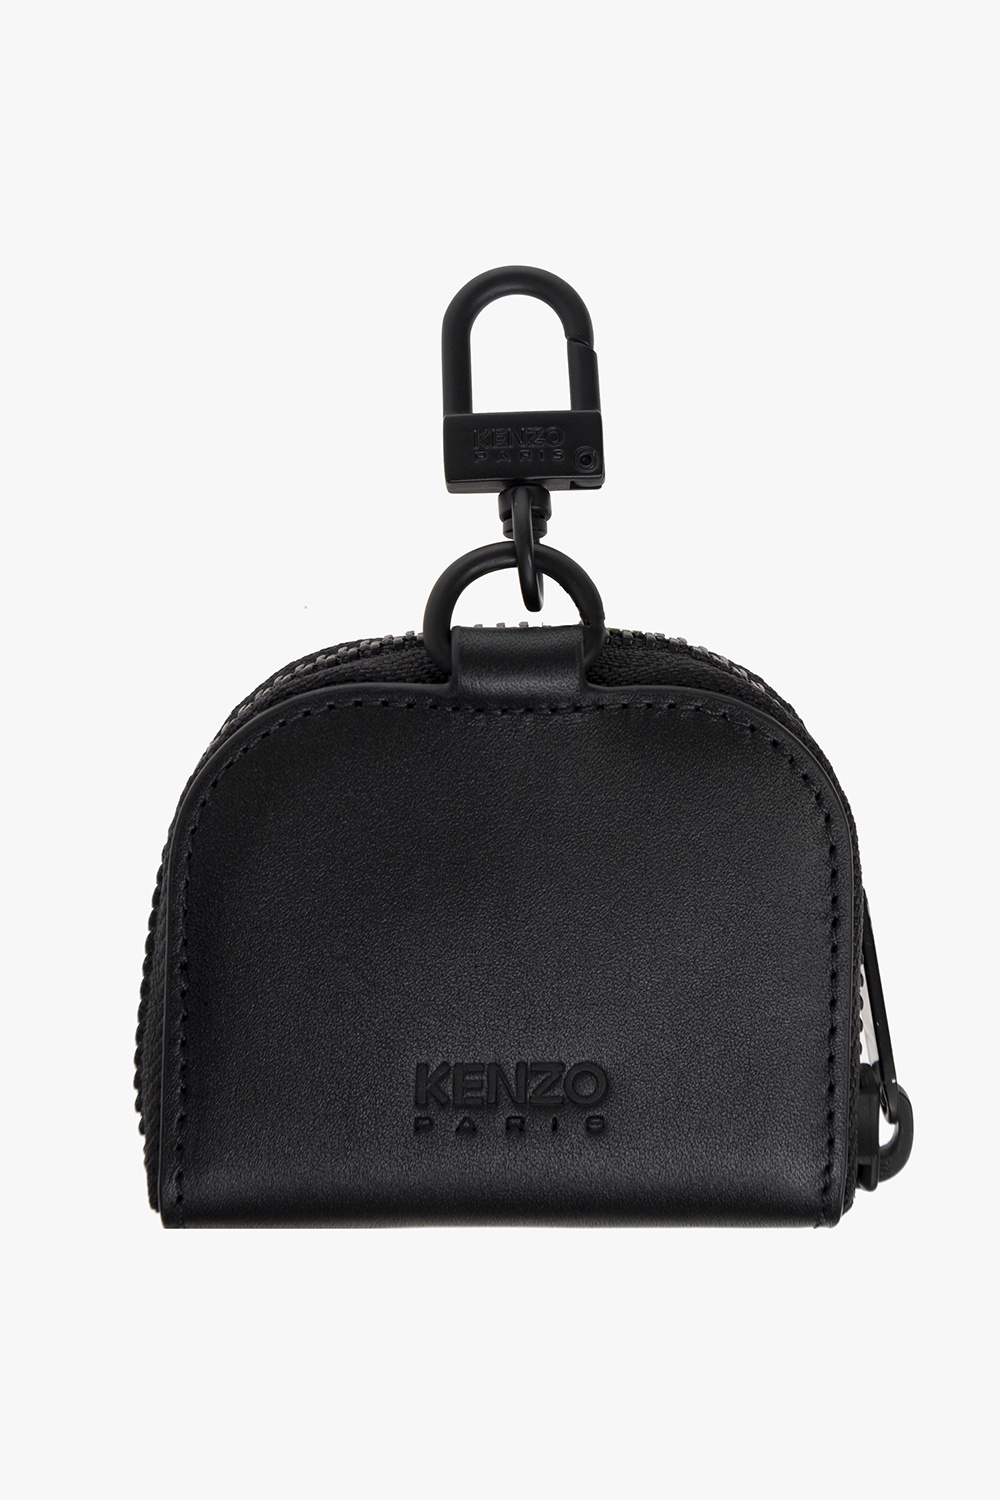 Kenzo AirPods case